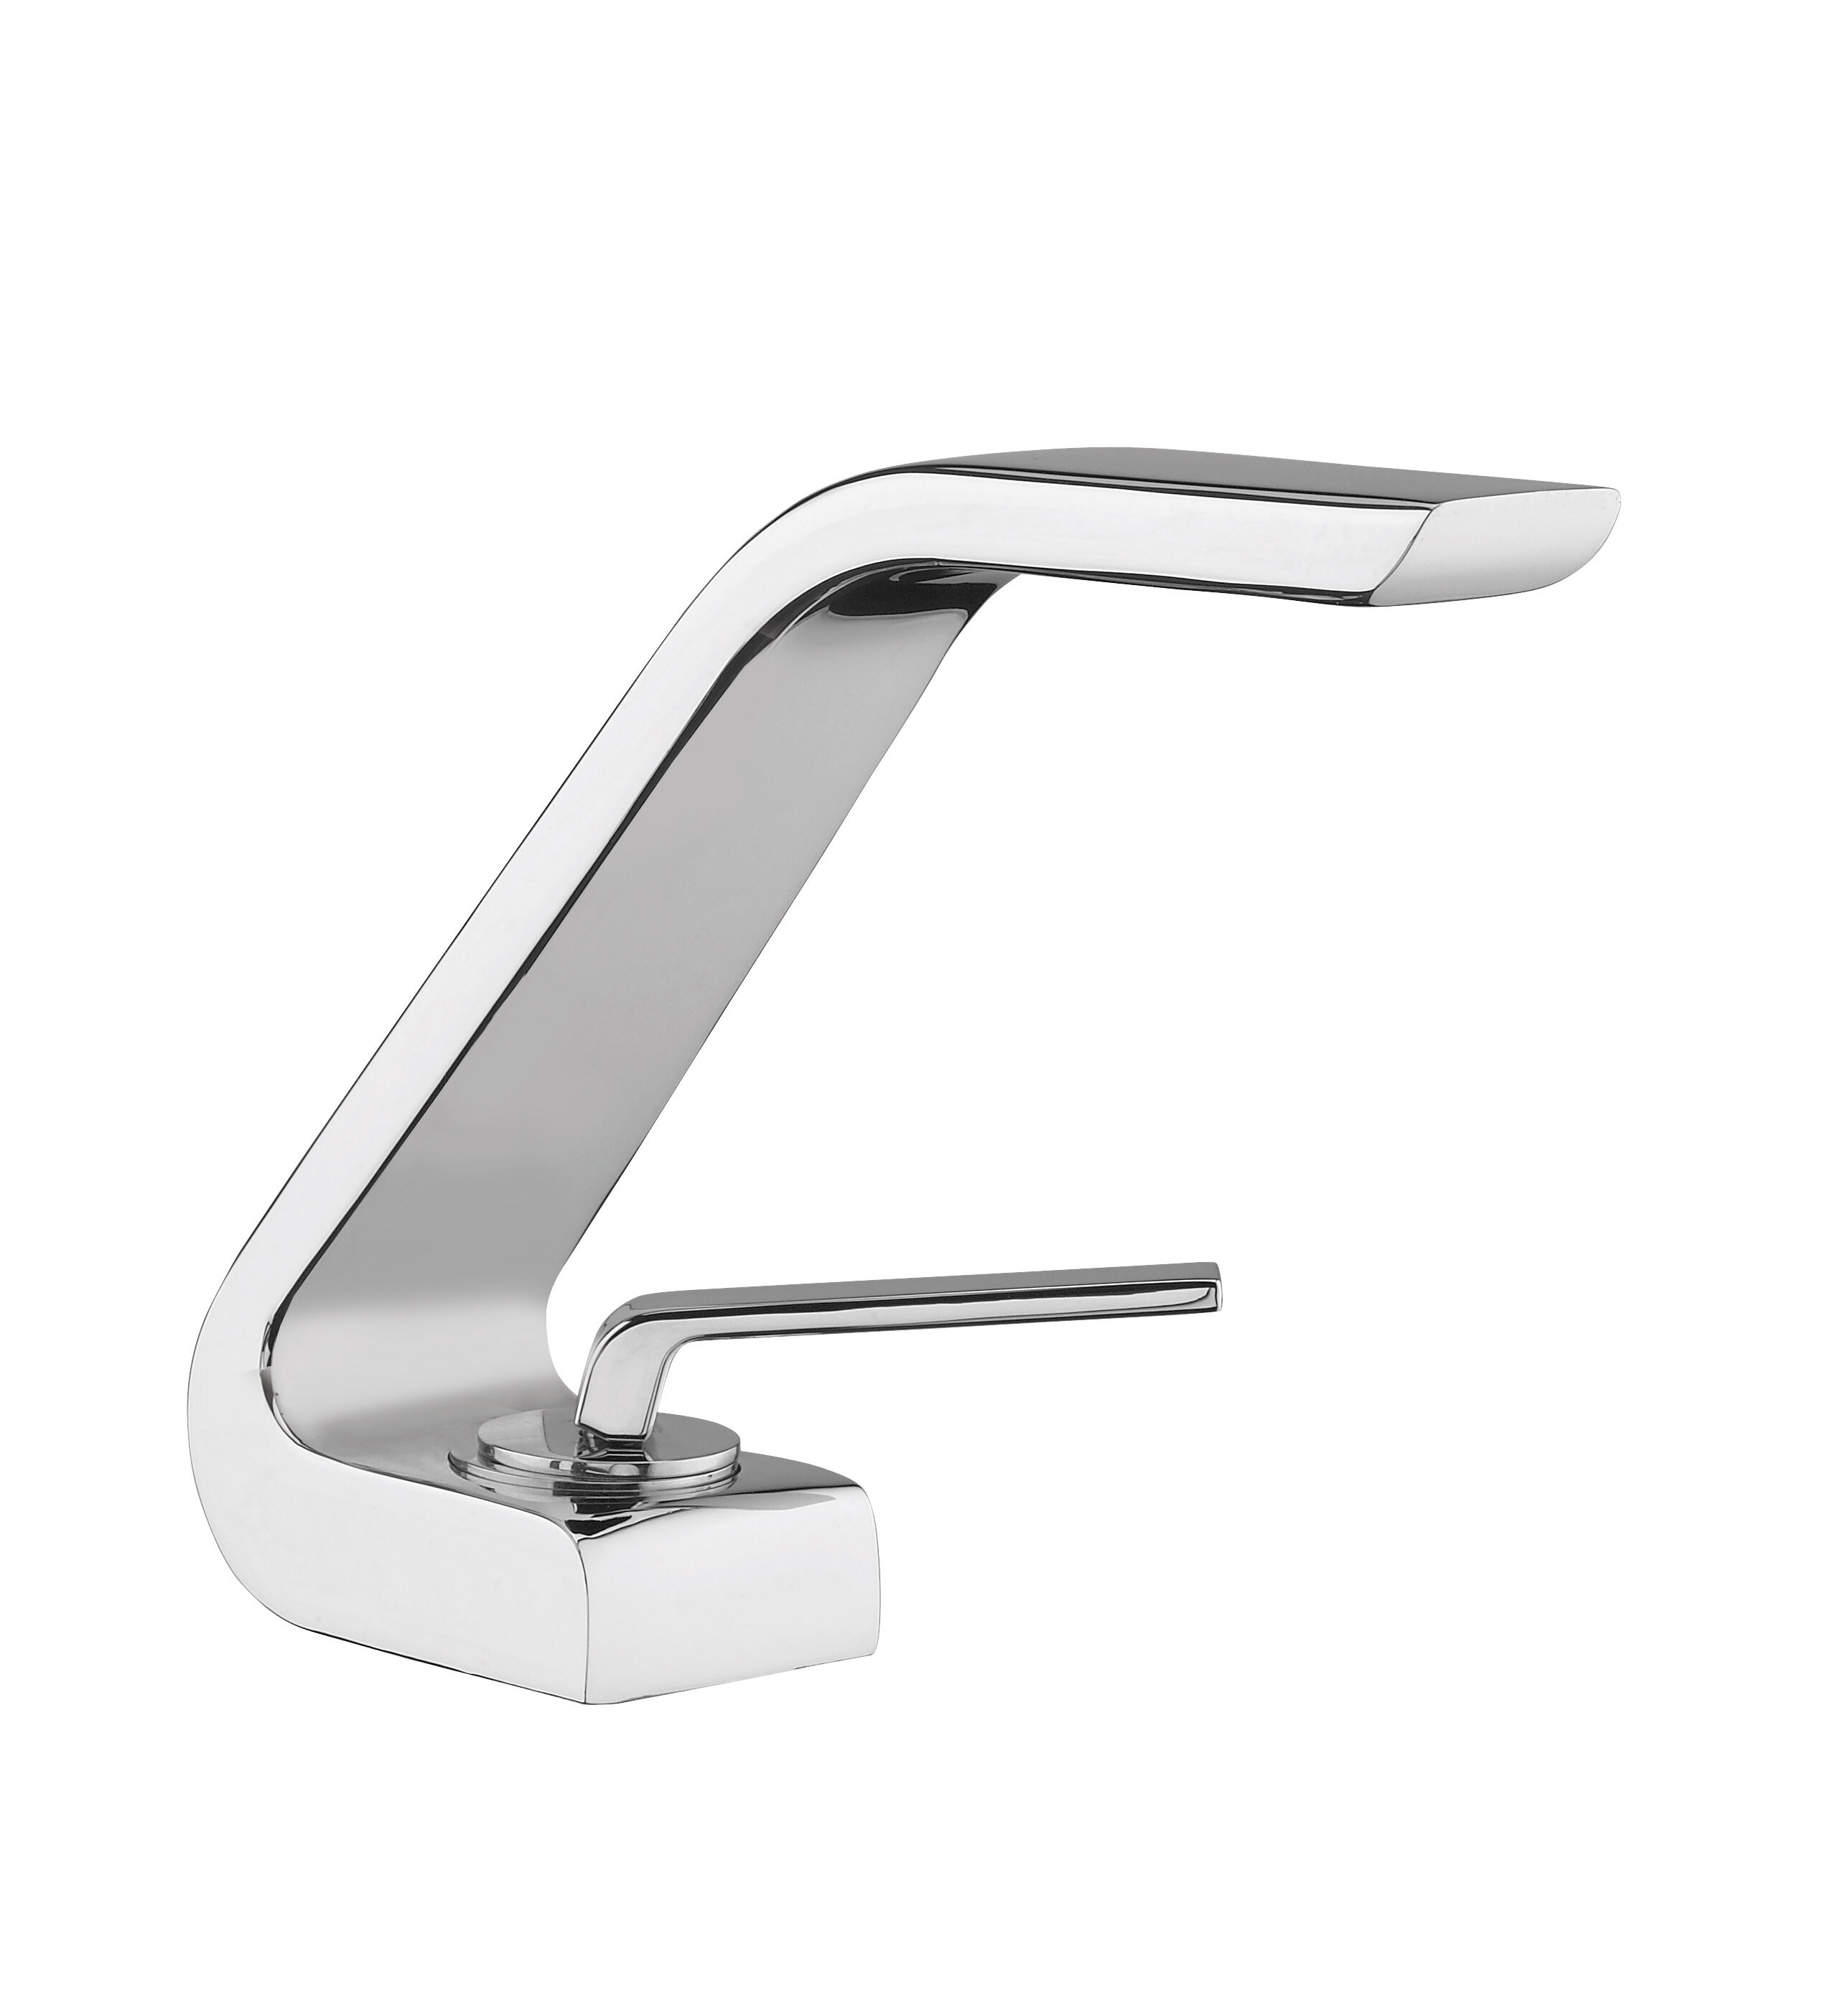 Webert Wolo Single Hole Bathroom Faucet With Drain Assembly Perigold